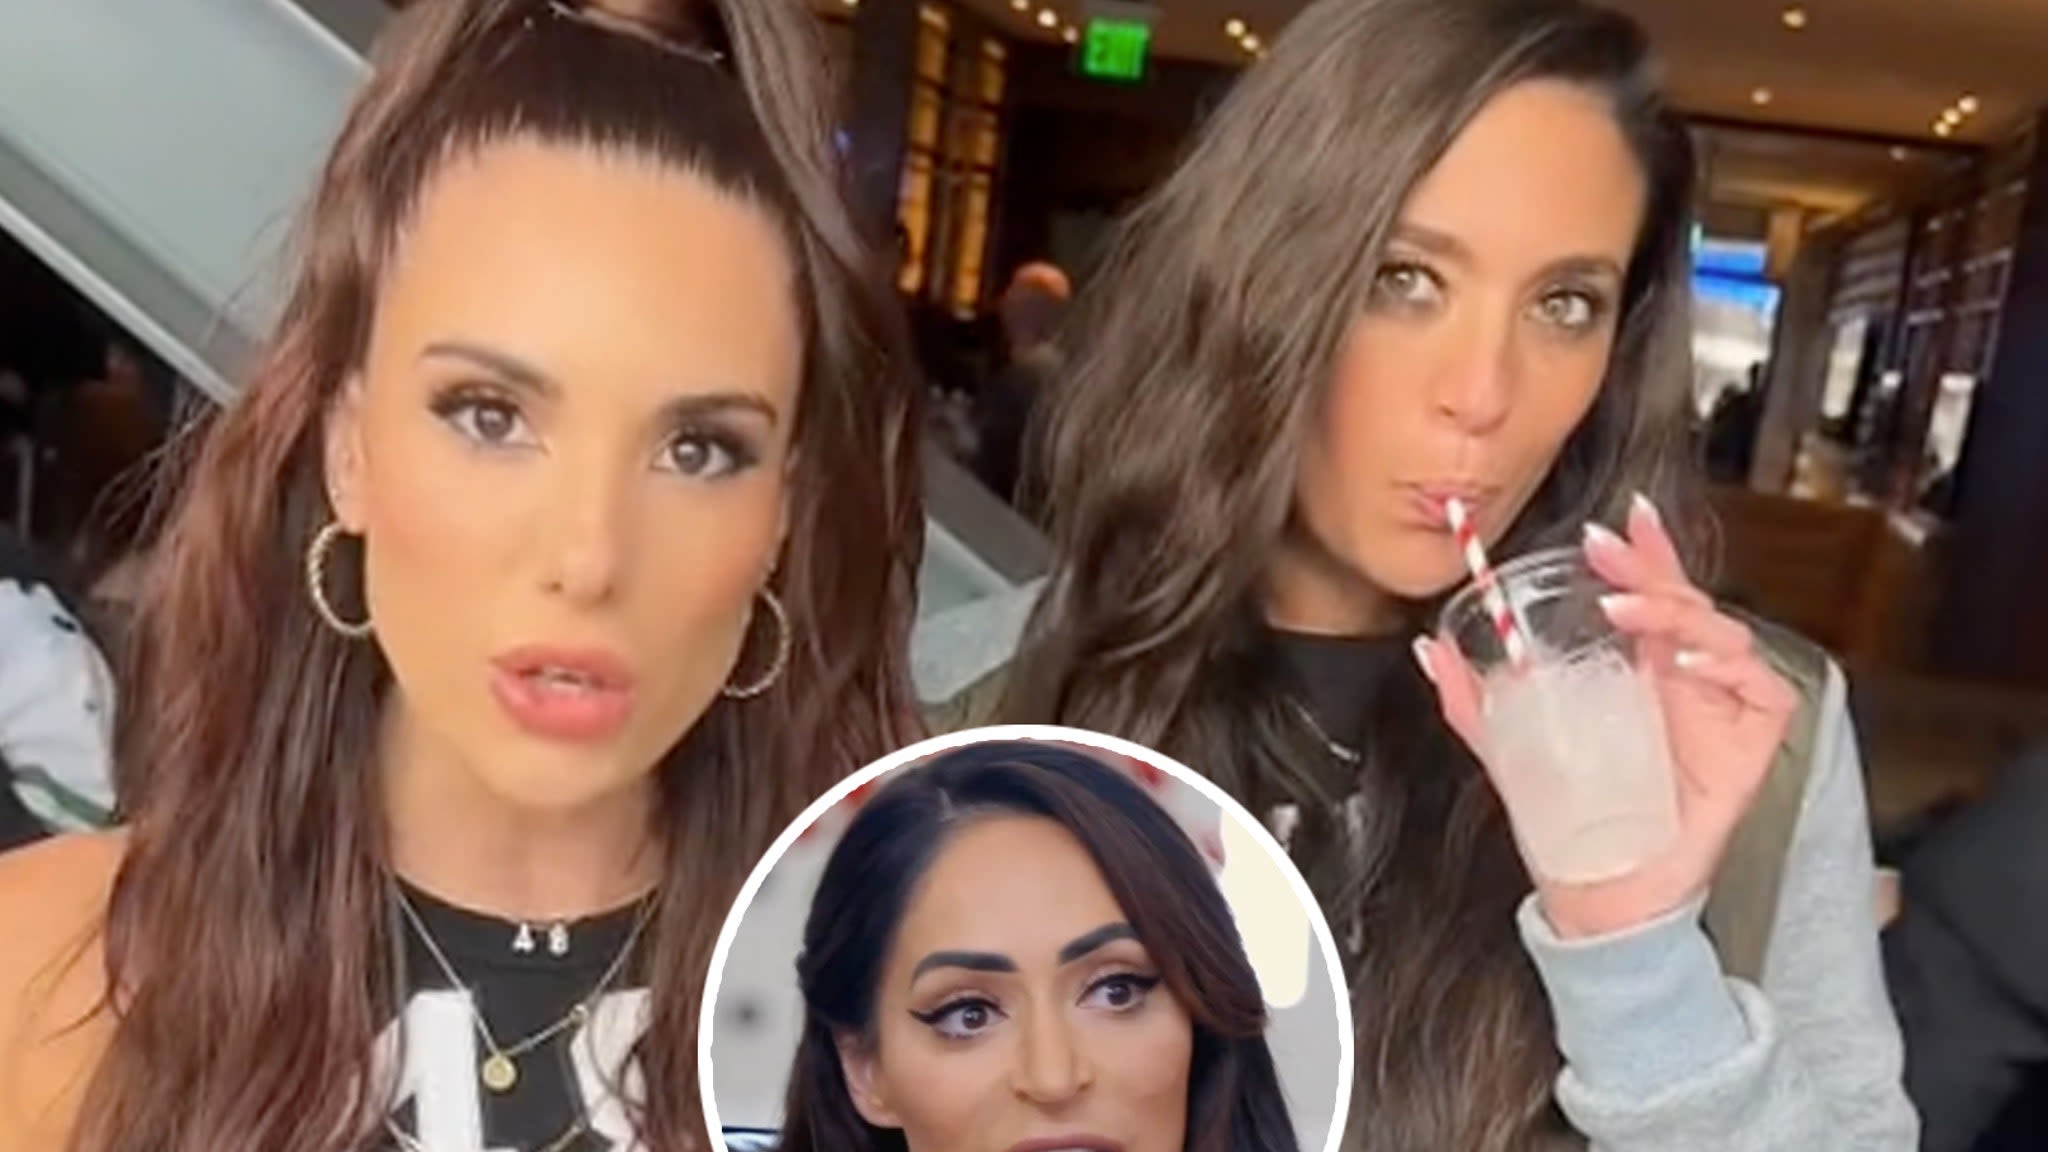 How Sammi Sweetheart's TikTok with Jets Player's Wife Sparked Major Jersey Shore Drama